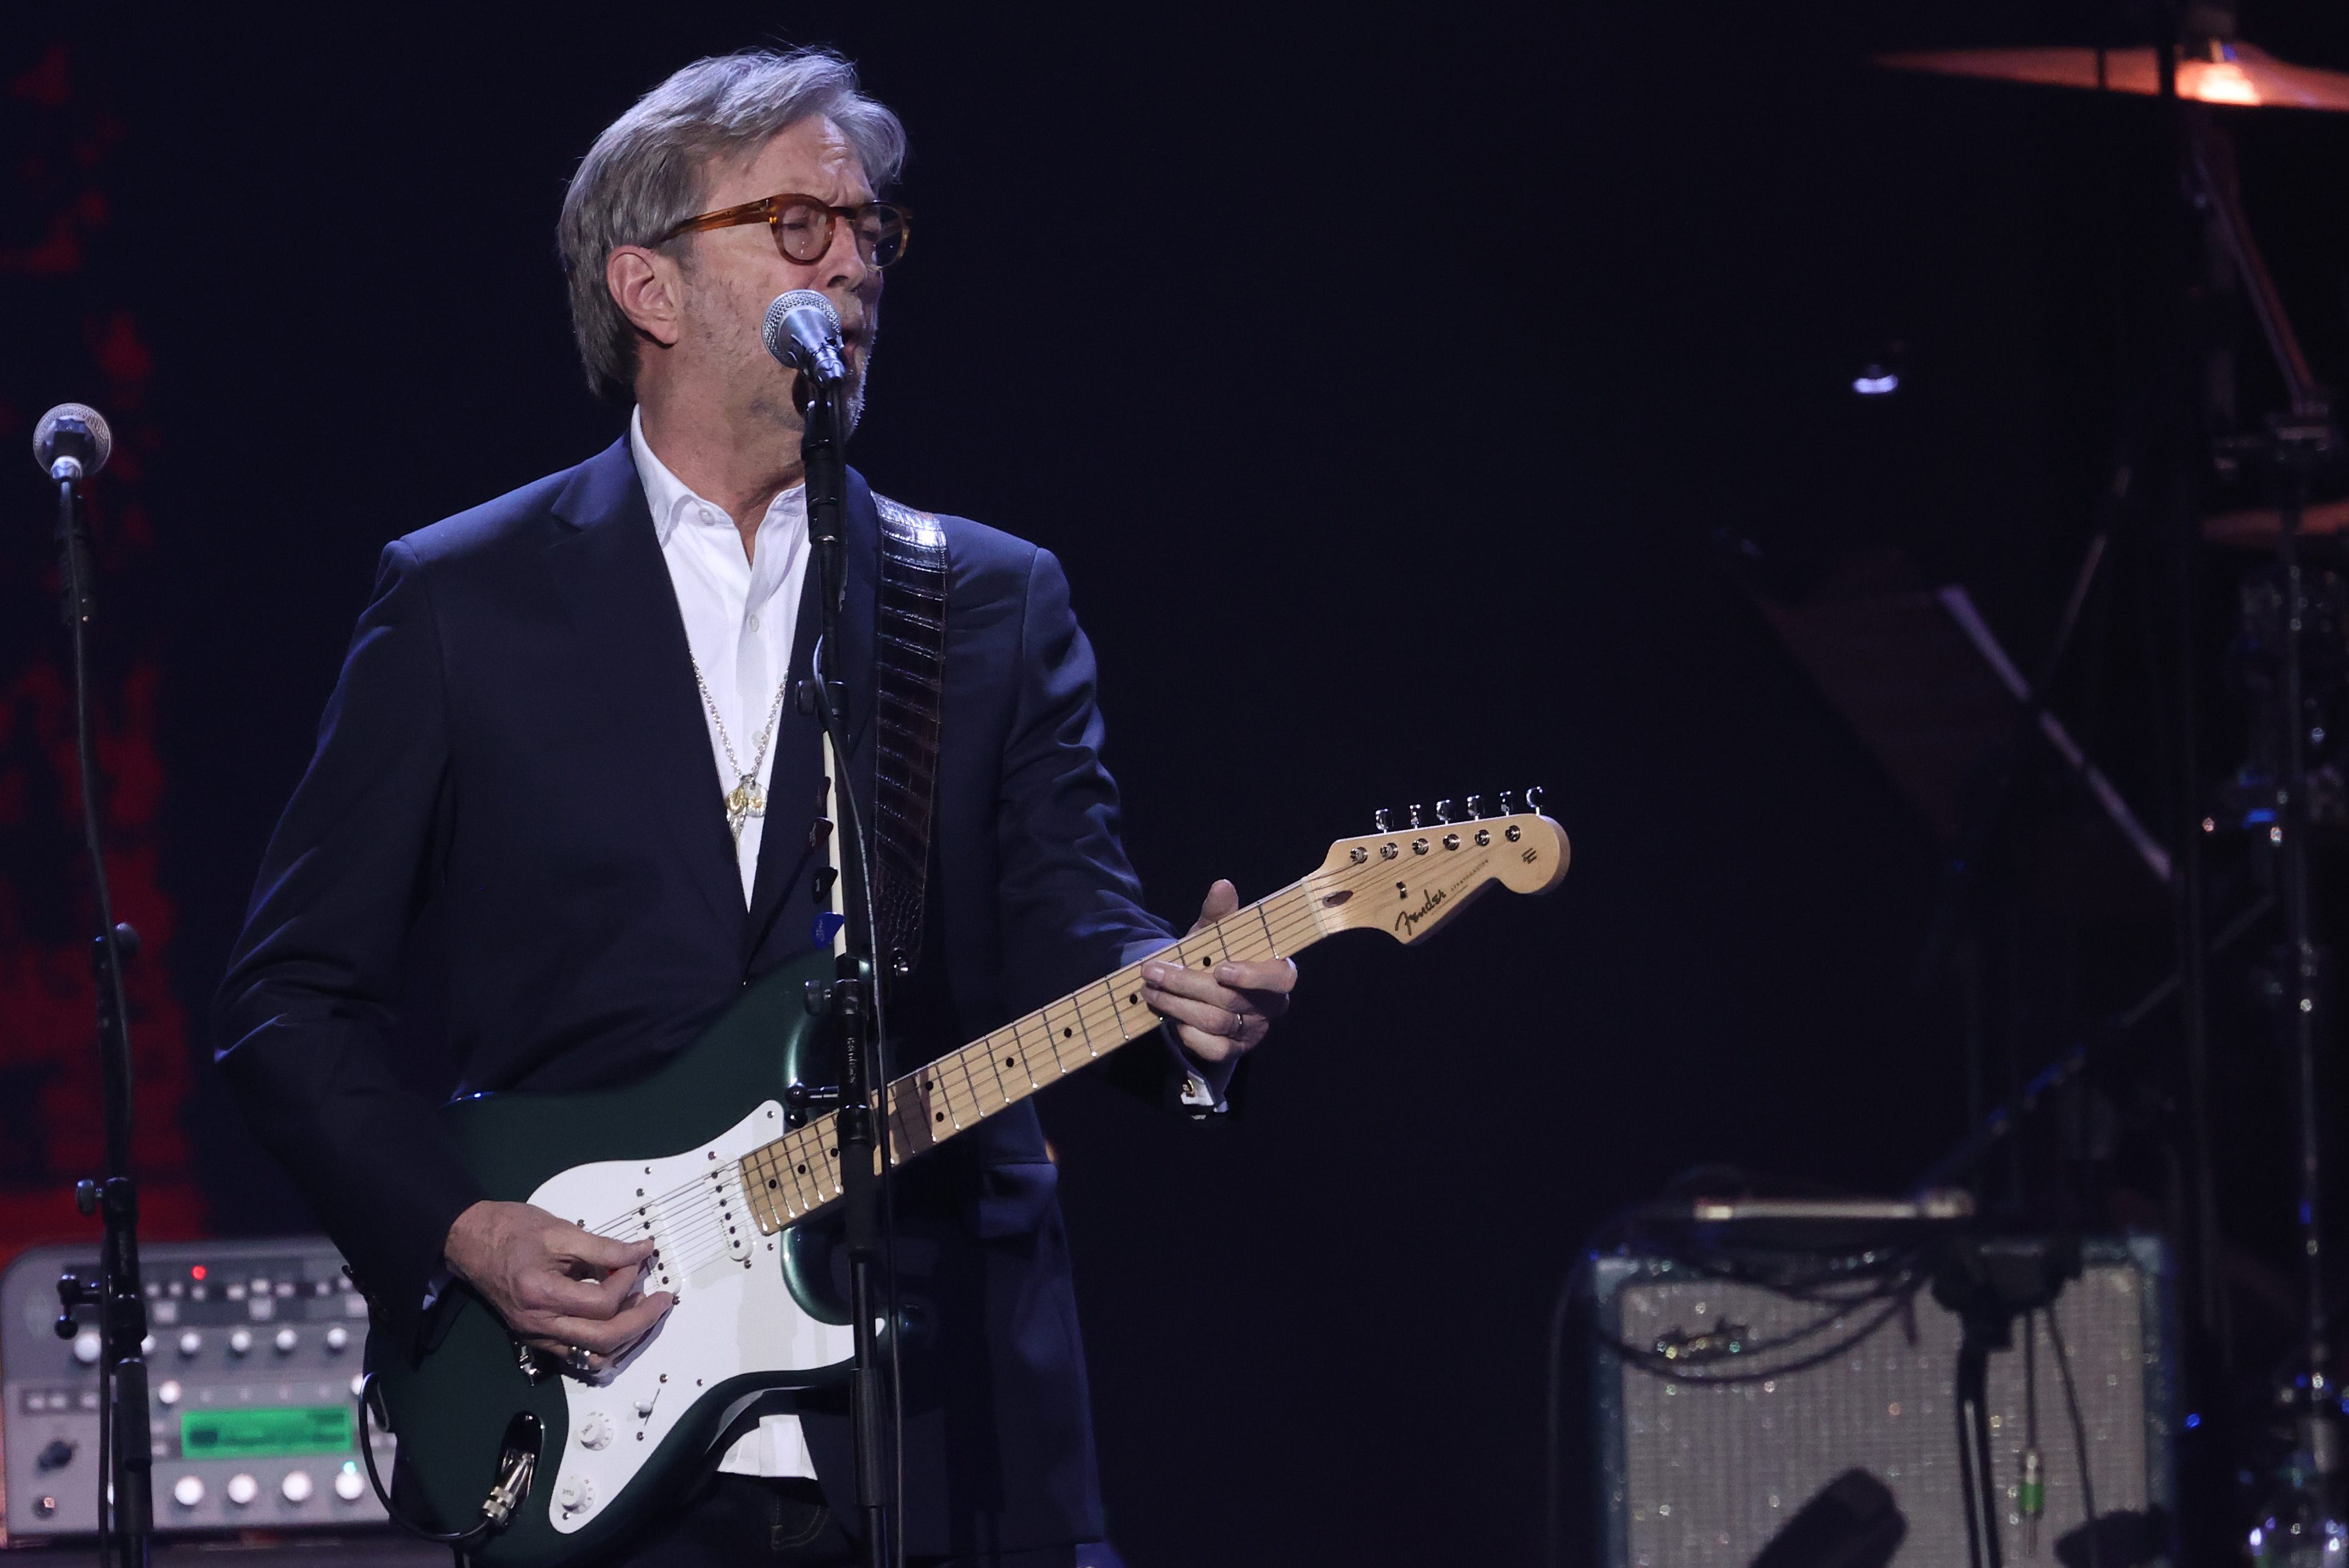 Eric Clapton attends the Music For The Marsden 2020 at The O2 Arena on March 03, 2020 in London, England. The guitarist has come under fire for his anti-vax views